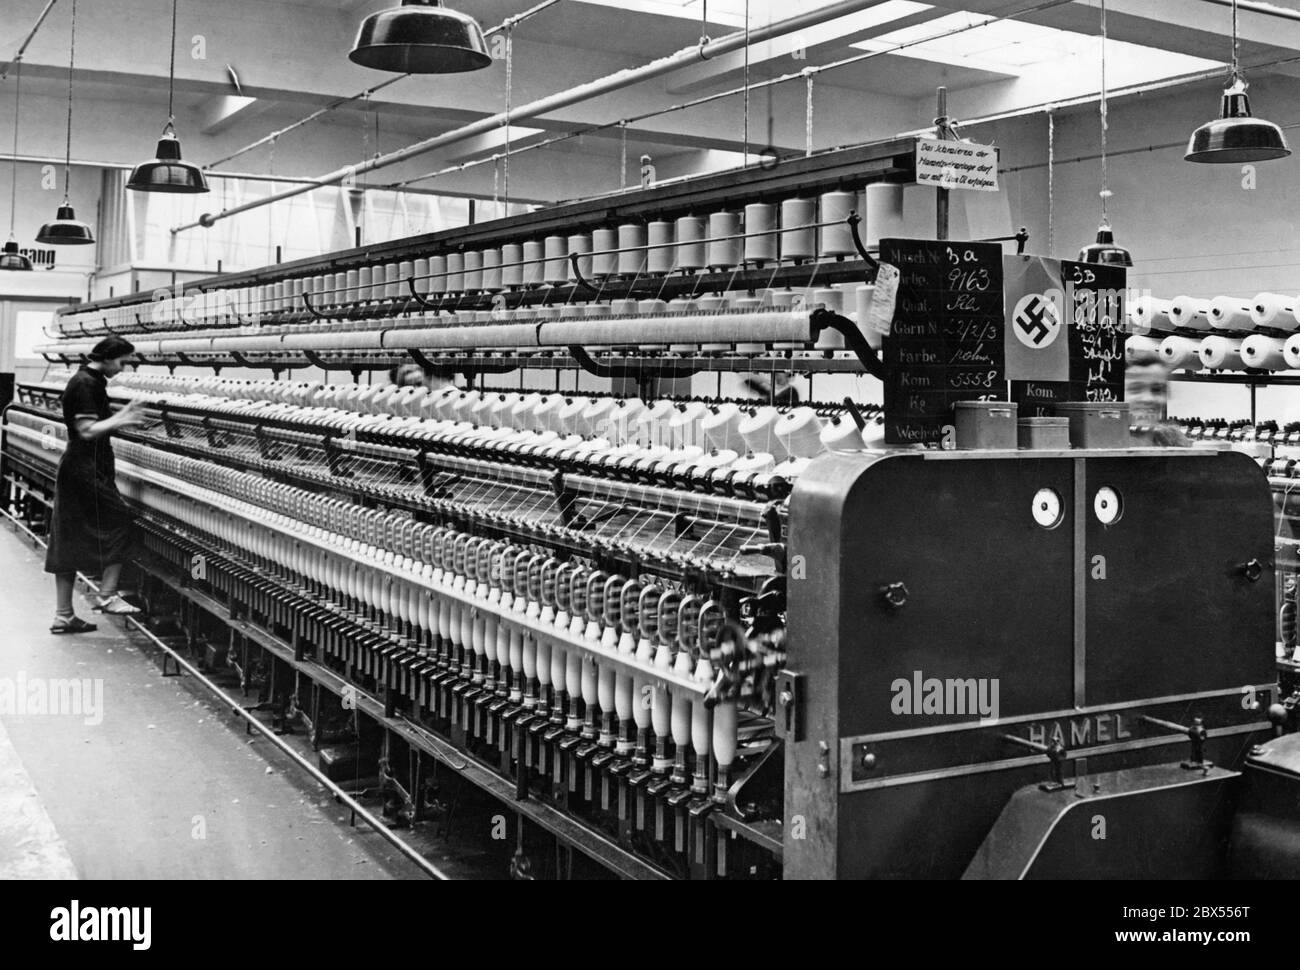 The photograph was taken in Reichenberg (today Liberec), which was part of the Sudetenland annexed in October 1938. It shows the wool spinning mill of the textile factory Liebig & Co, which was equipped with spinning machines considered modern for the standards of that time. On the right side of the machine is a work instruction: 'Lubrication of the Hamel twist rings may only be done with Etna oil'. Stock Photo